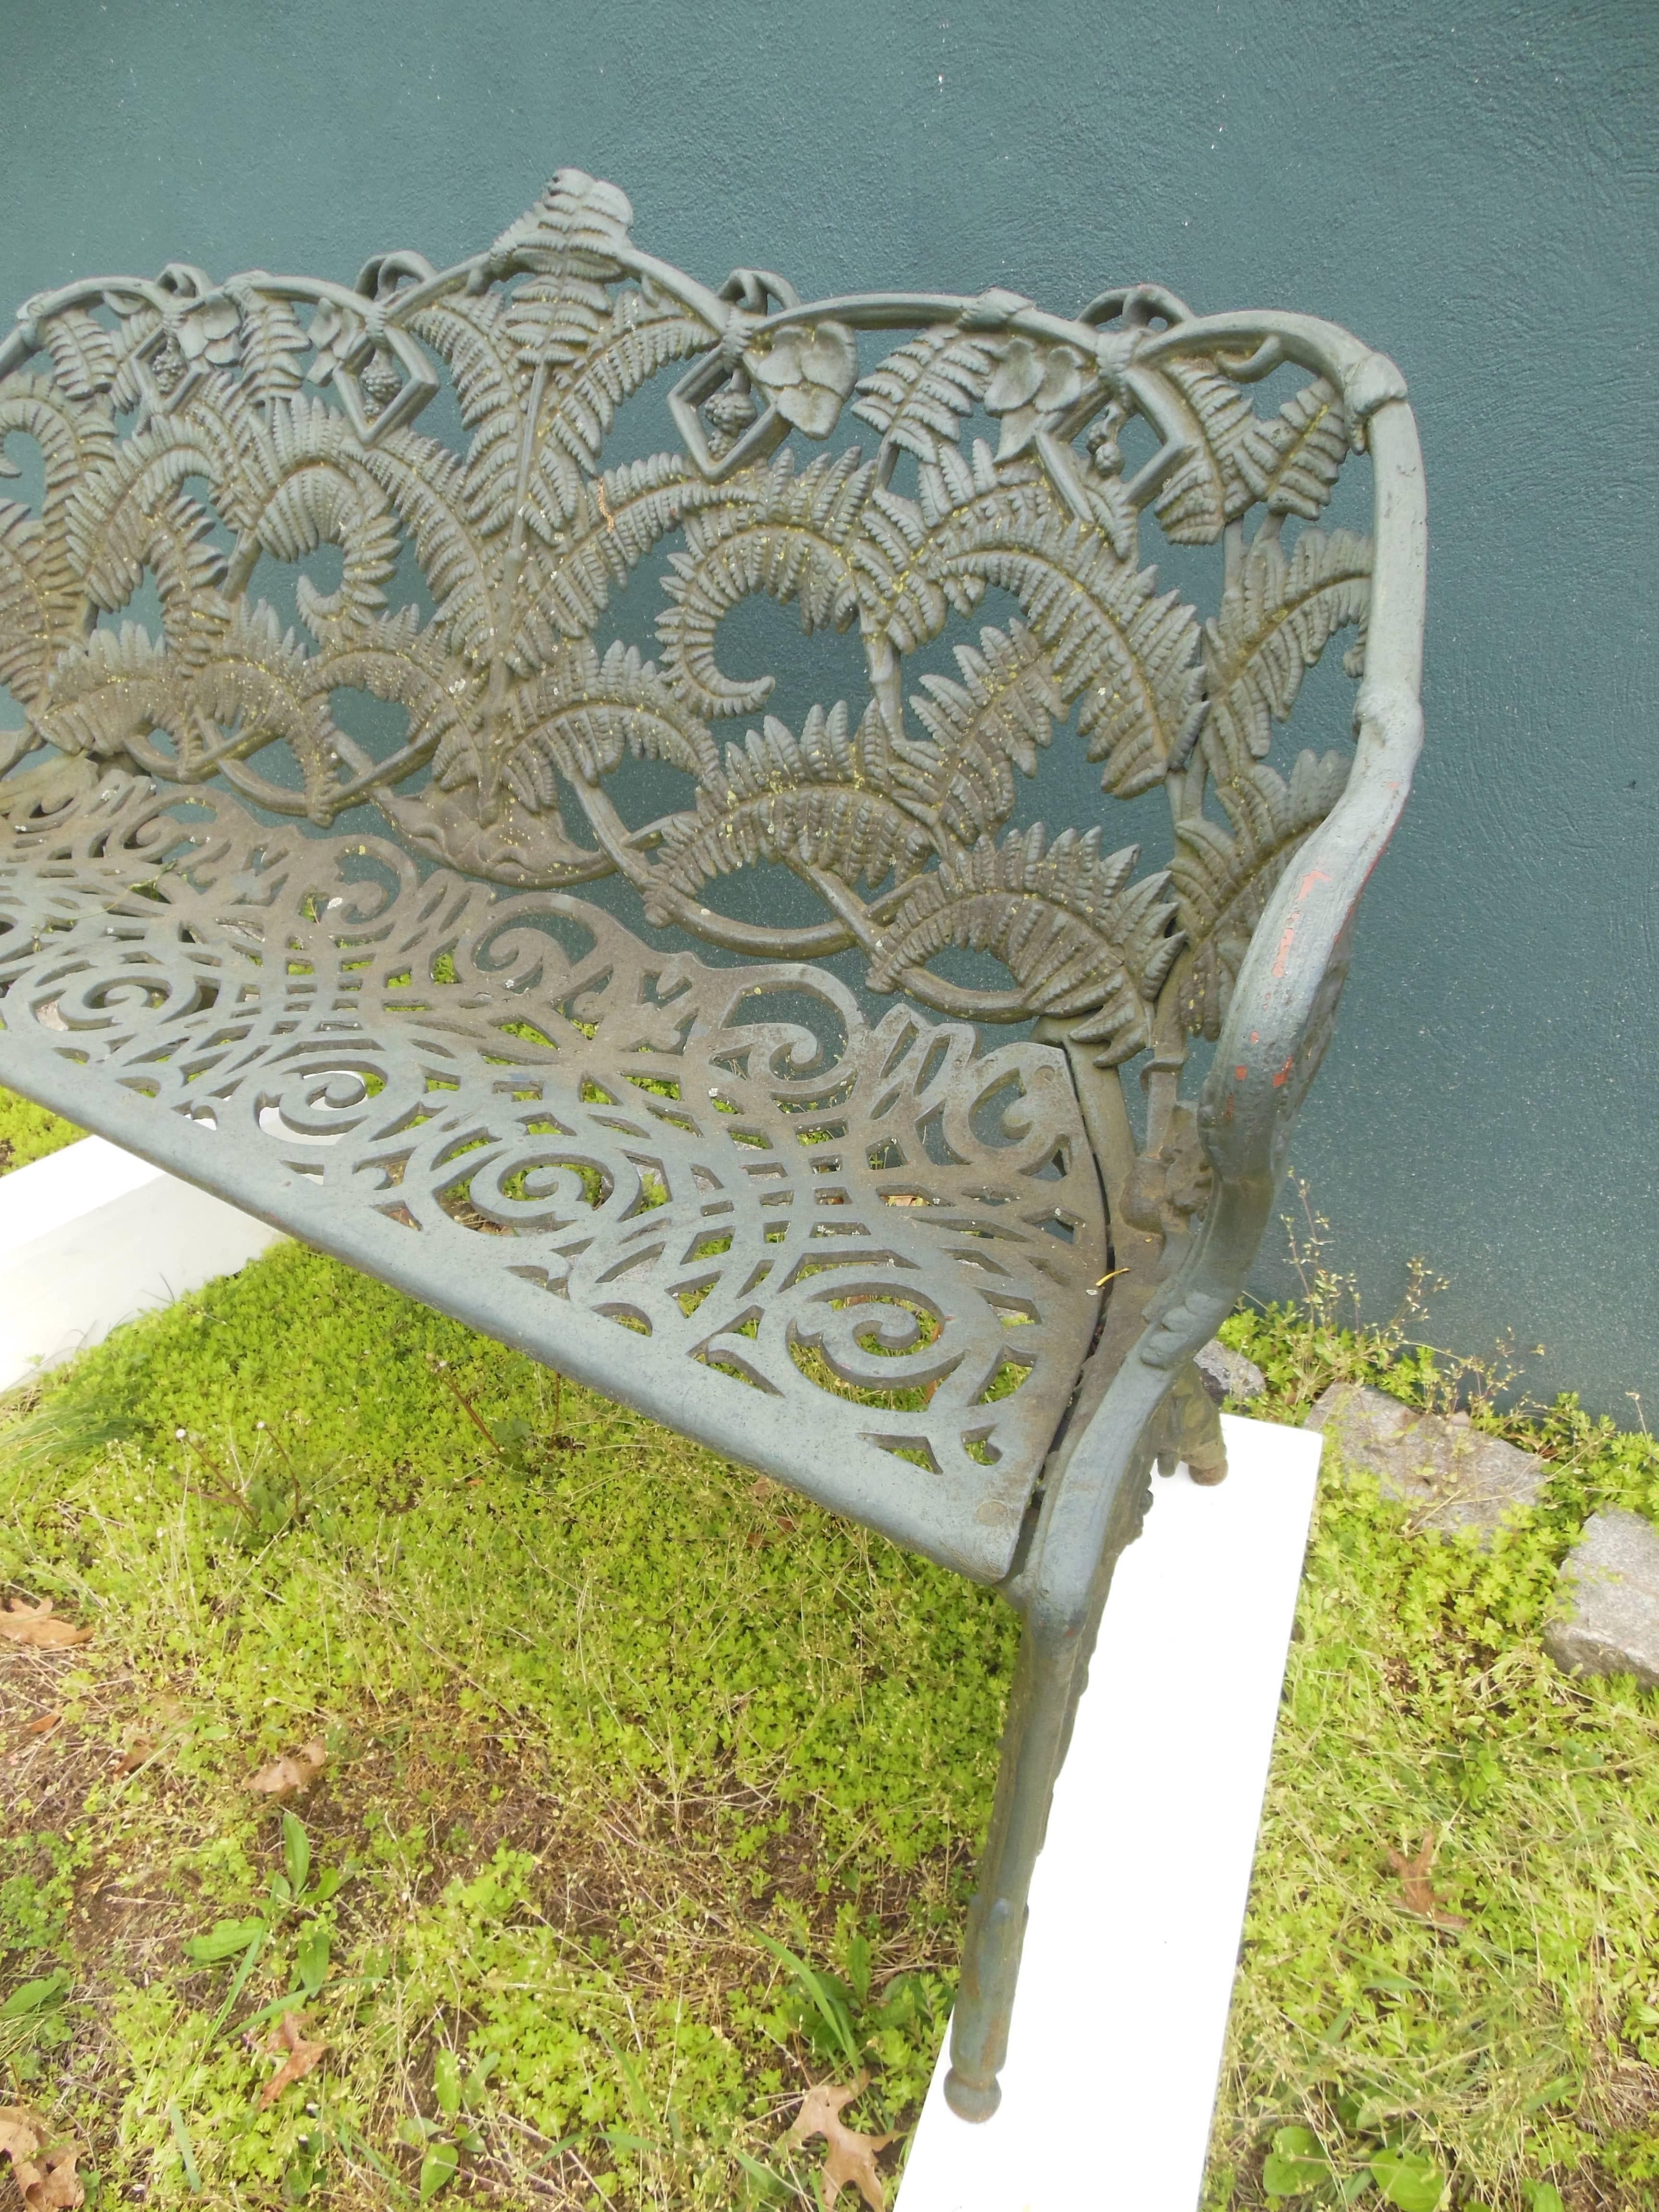 An antique cast iron garden bench in the desirable fern pattern. The detail of the bench with the scroll design on the seat and the back ablaze with the detail of large fern leaves. The measurements on this very heavy cast iron bench differ from